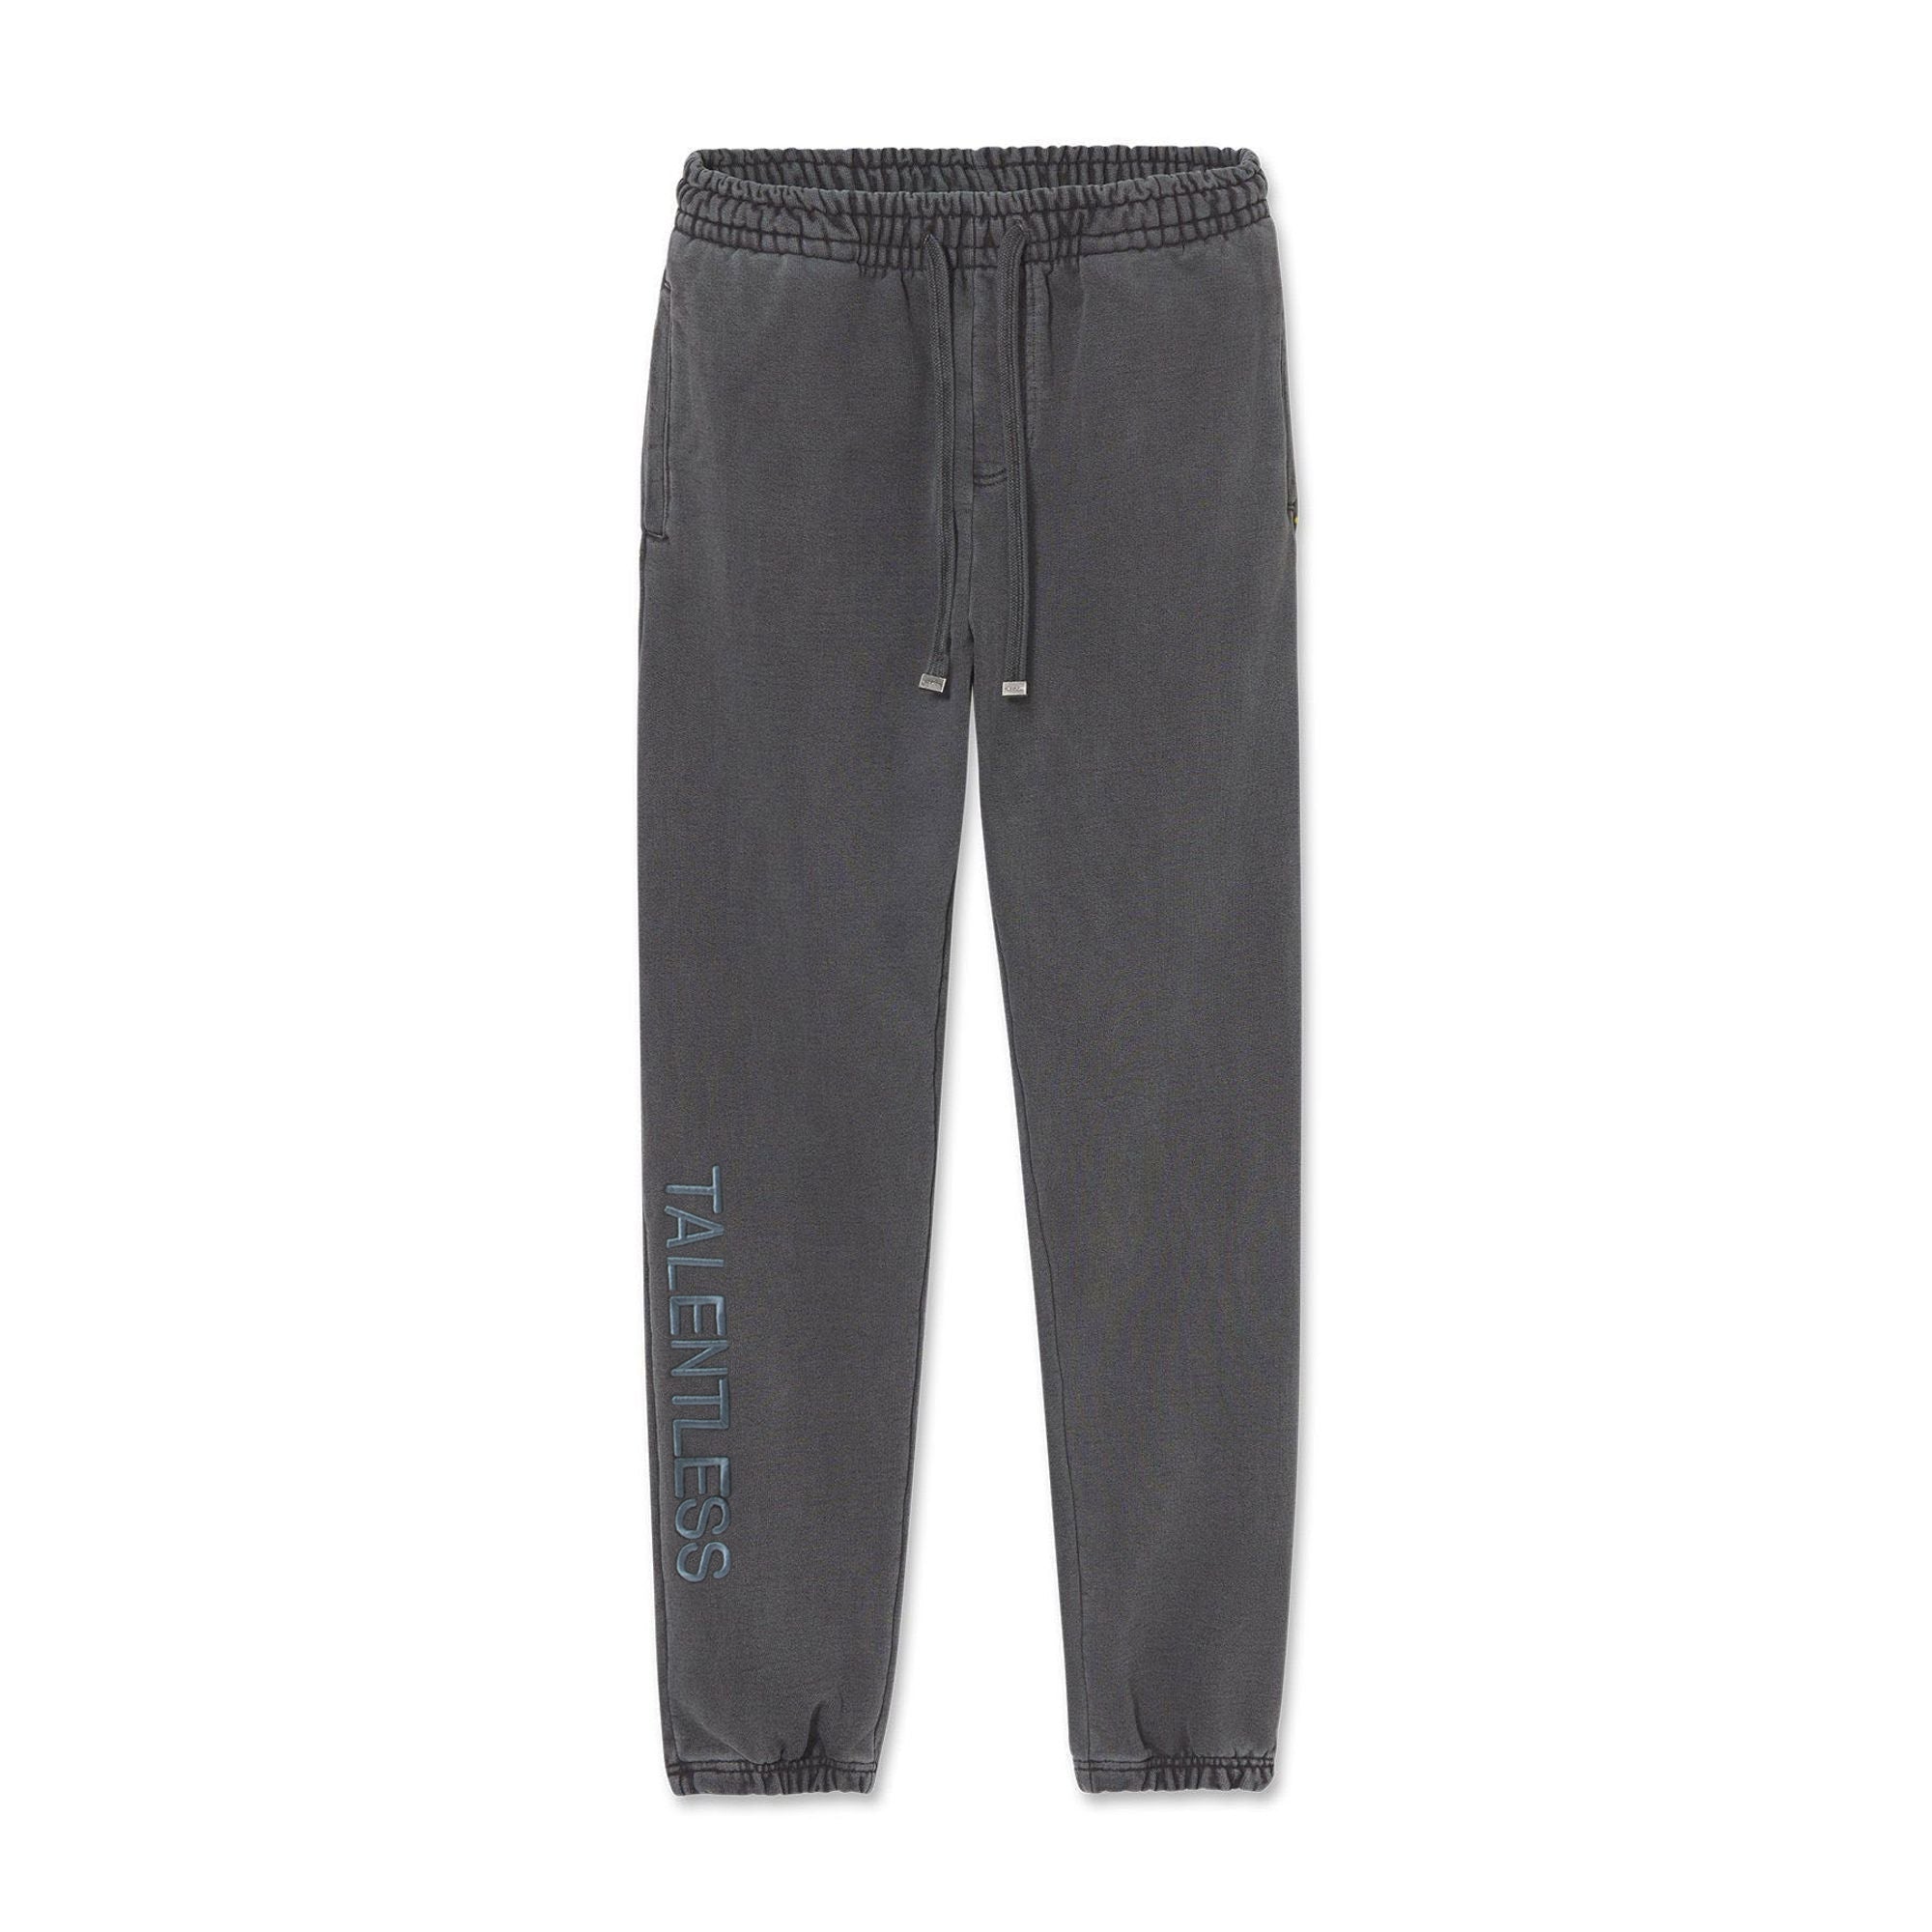 Men's Heavyweight Embroidered Sweatpants